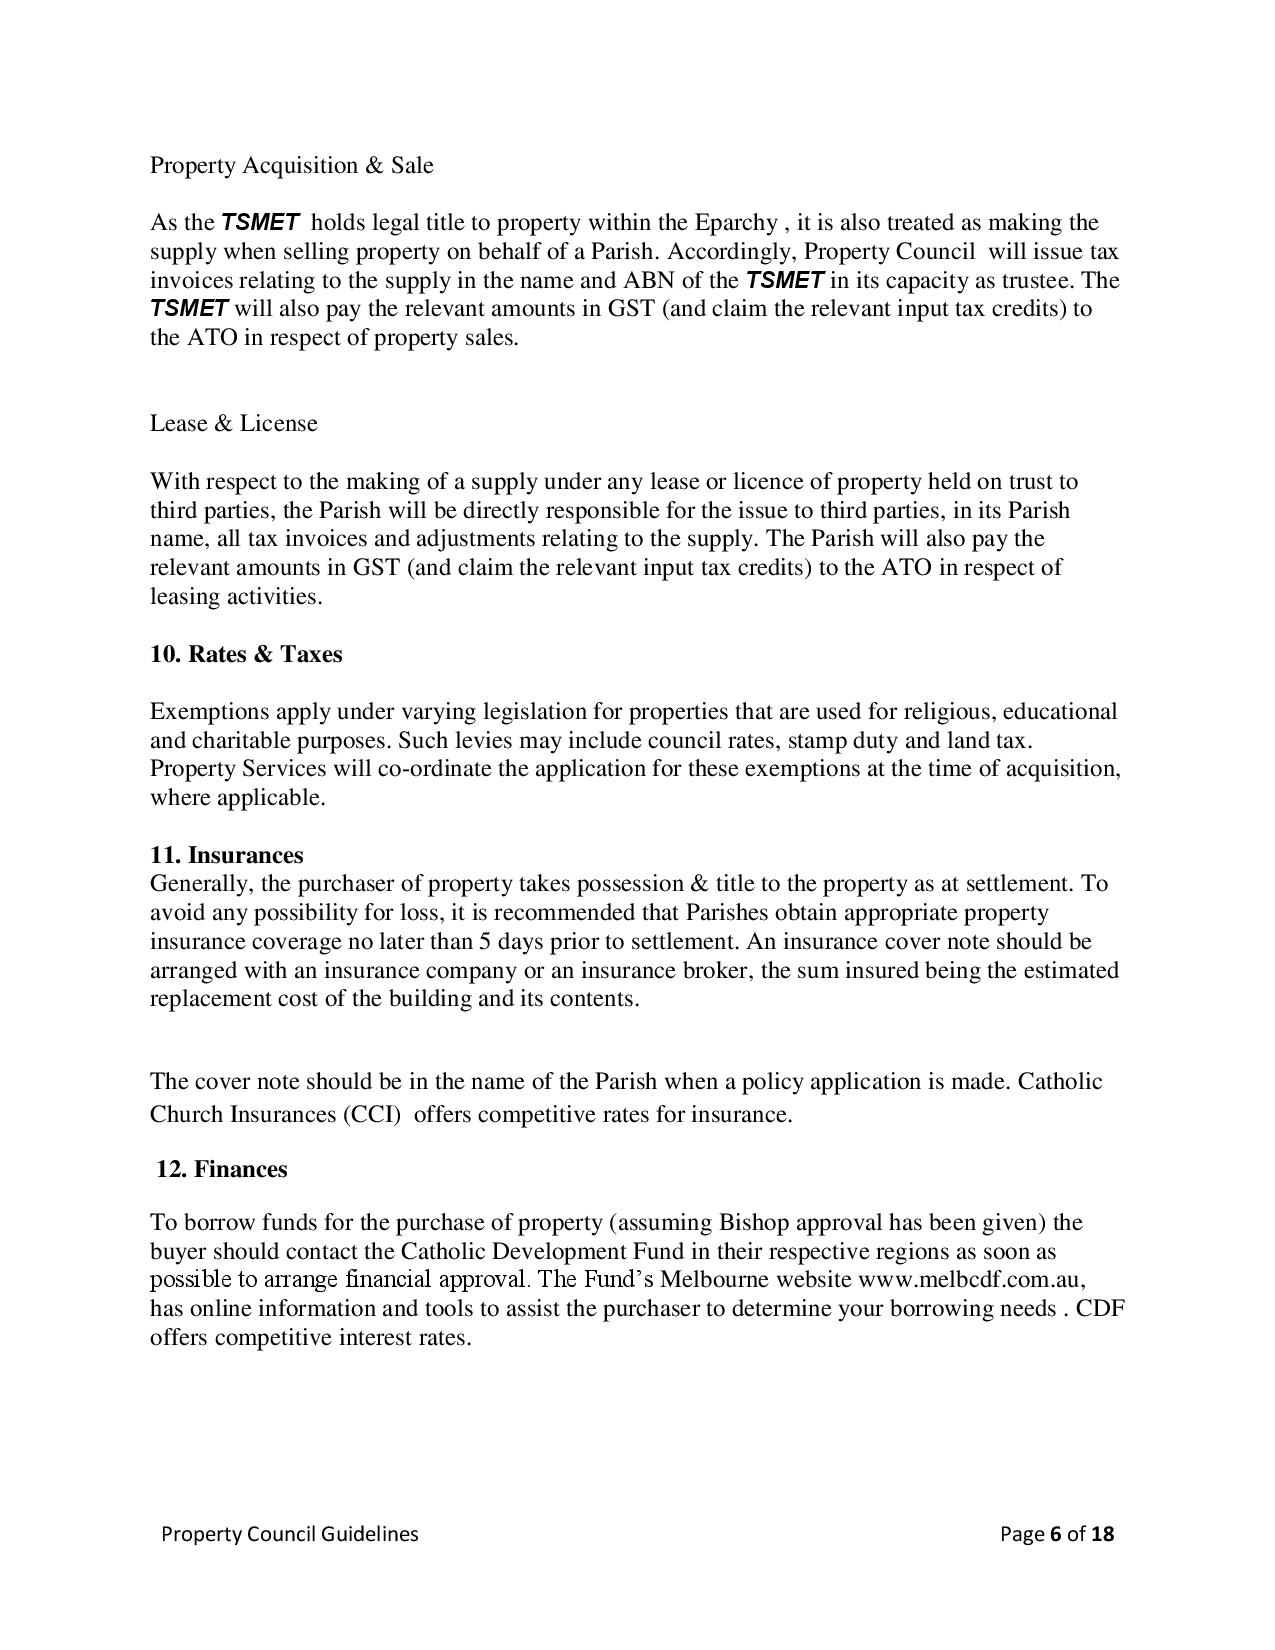 property-council-guidlines-v2-4-page-006